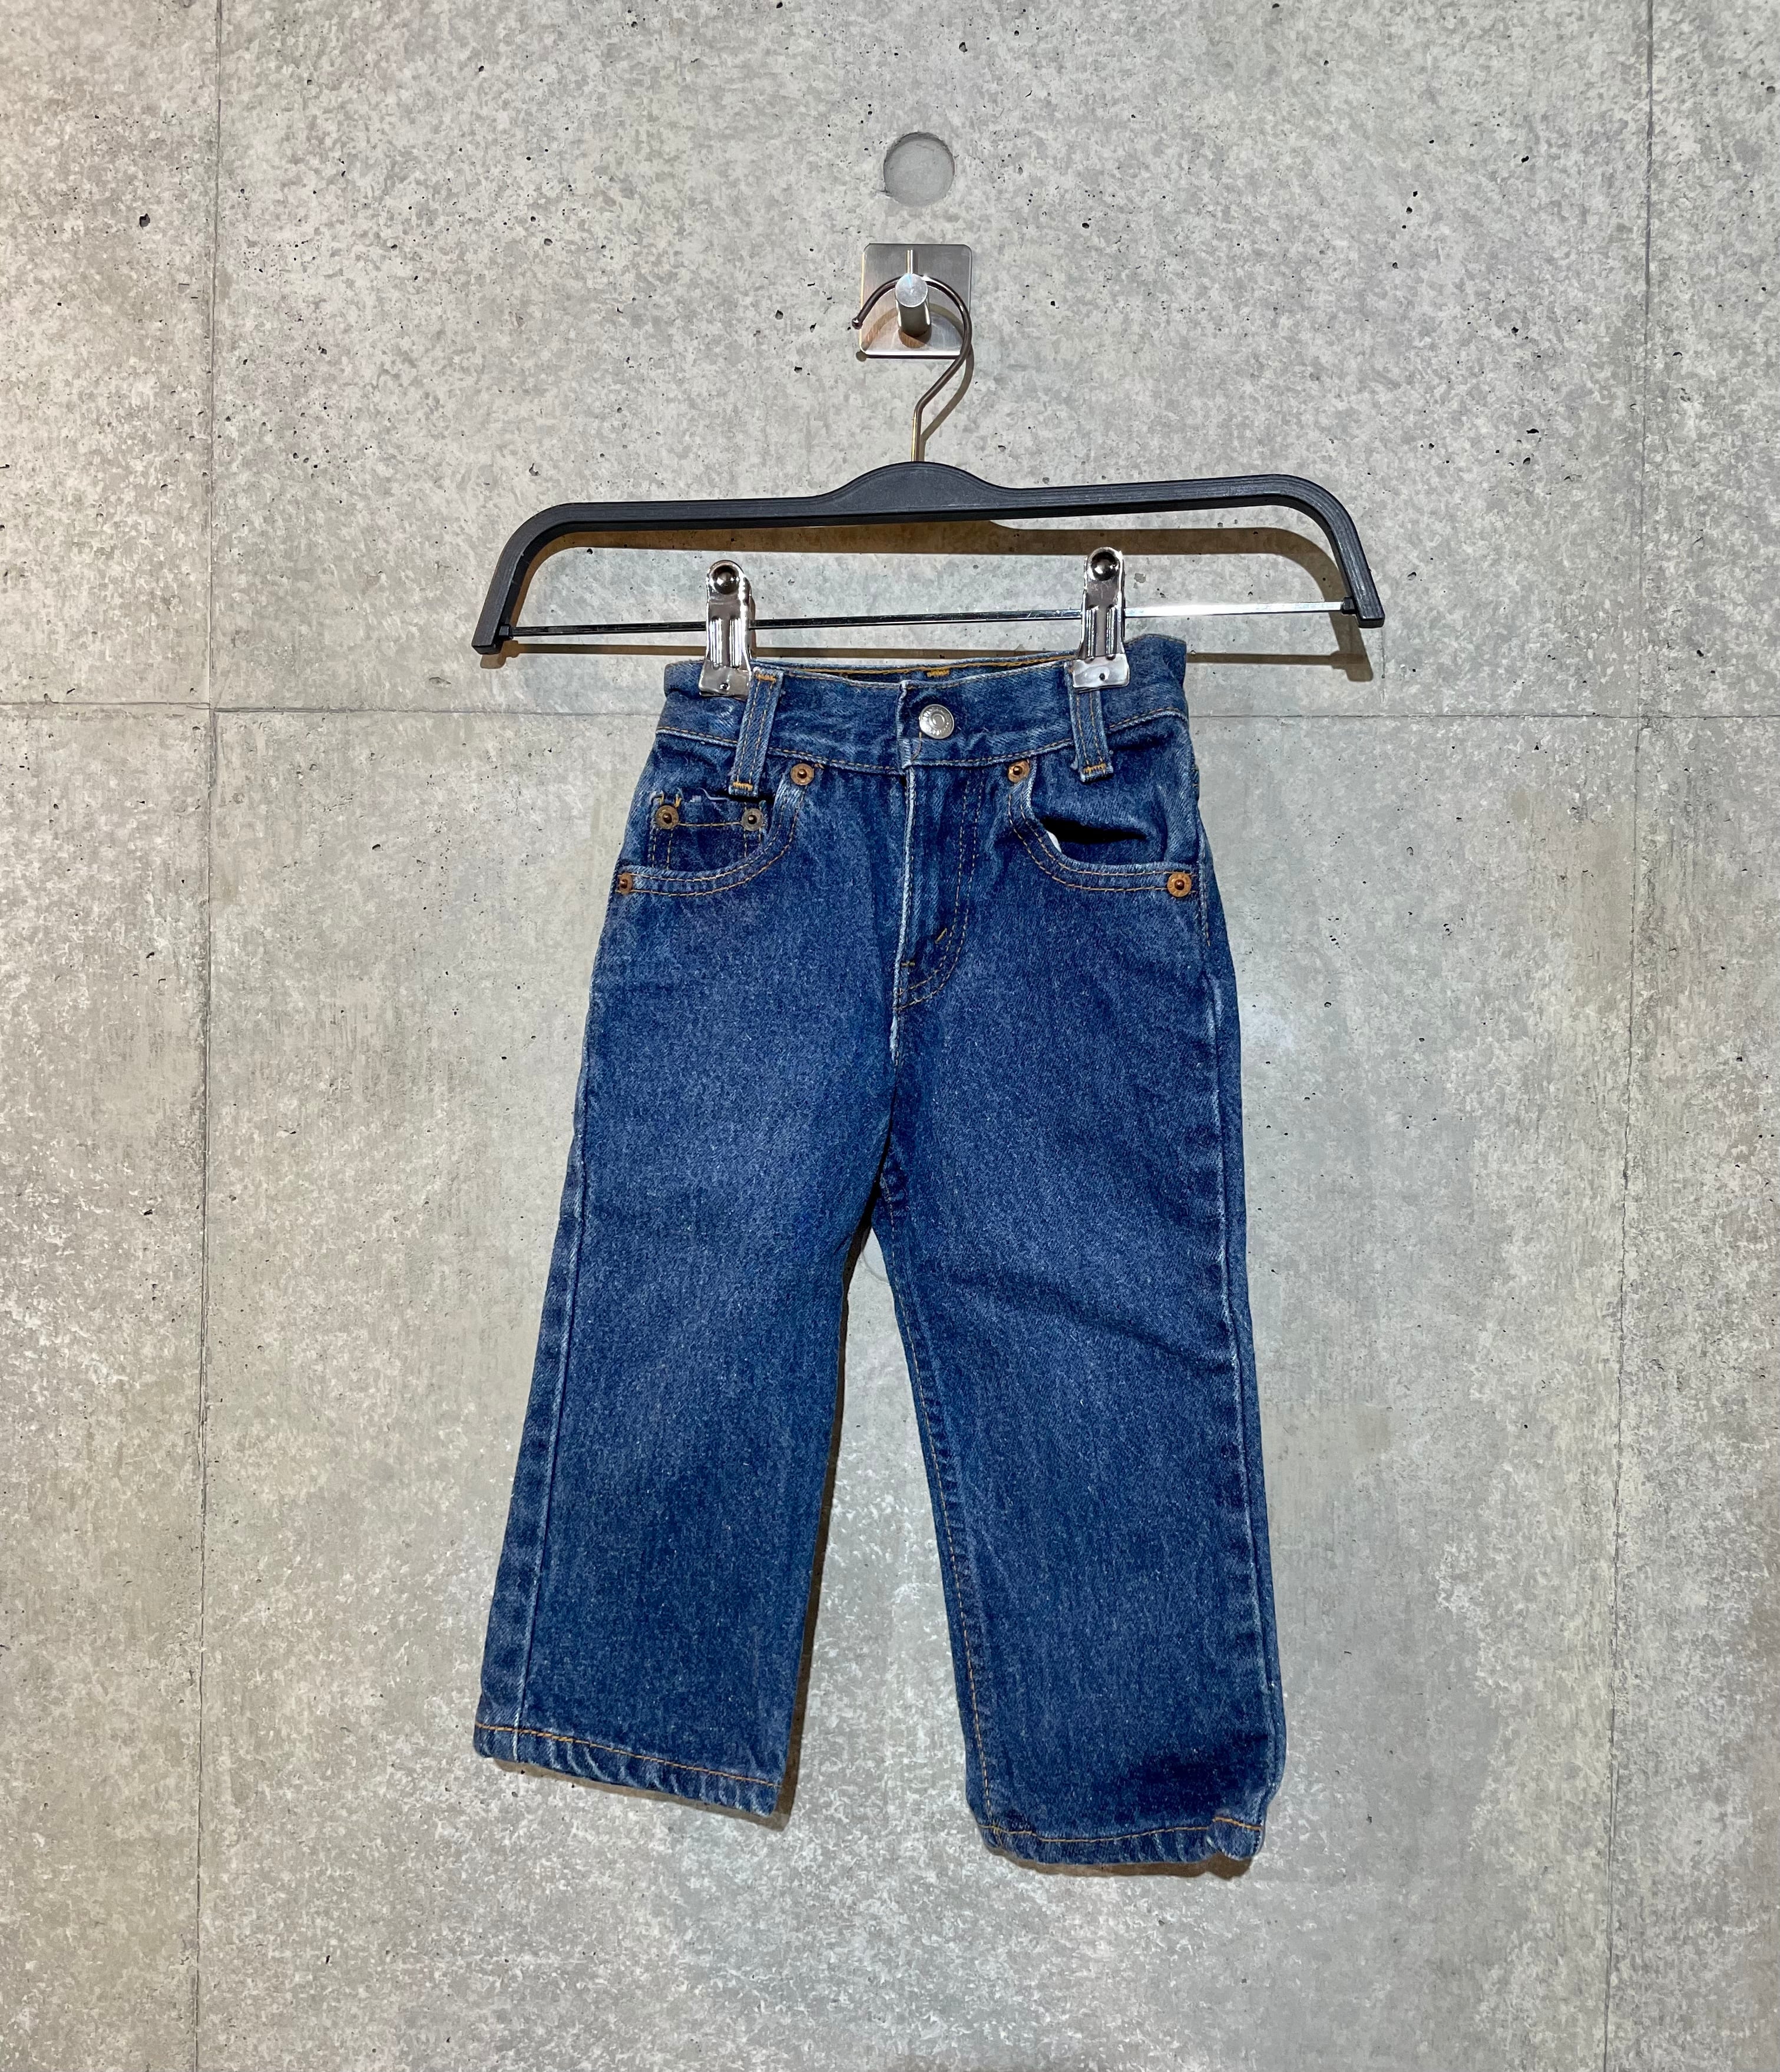 80s Levi's 302-0117 age 0 Kids  501 キッズ